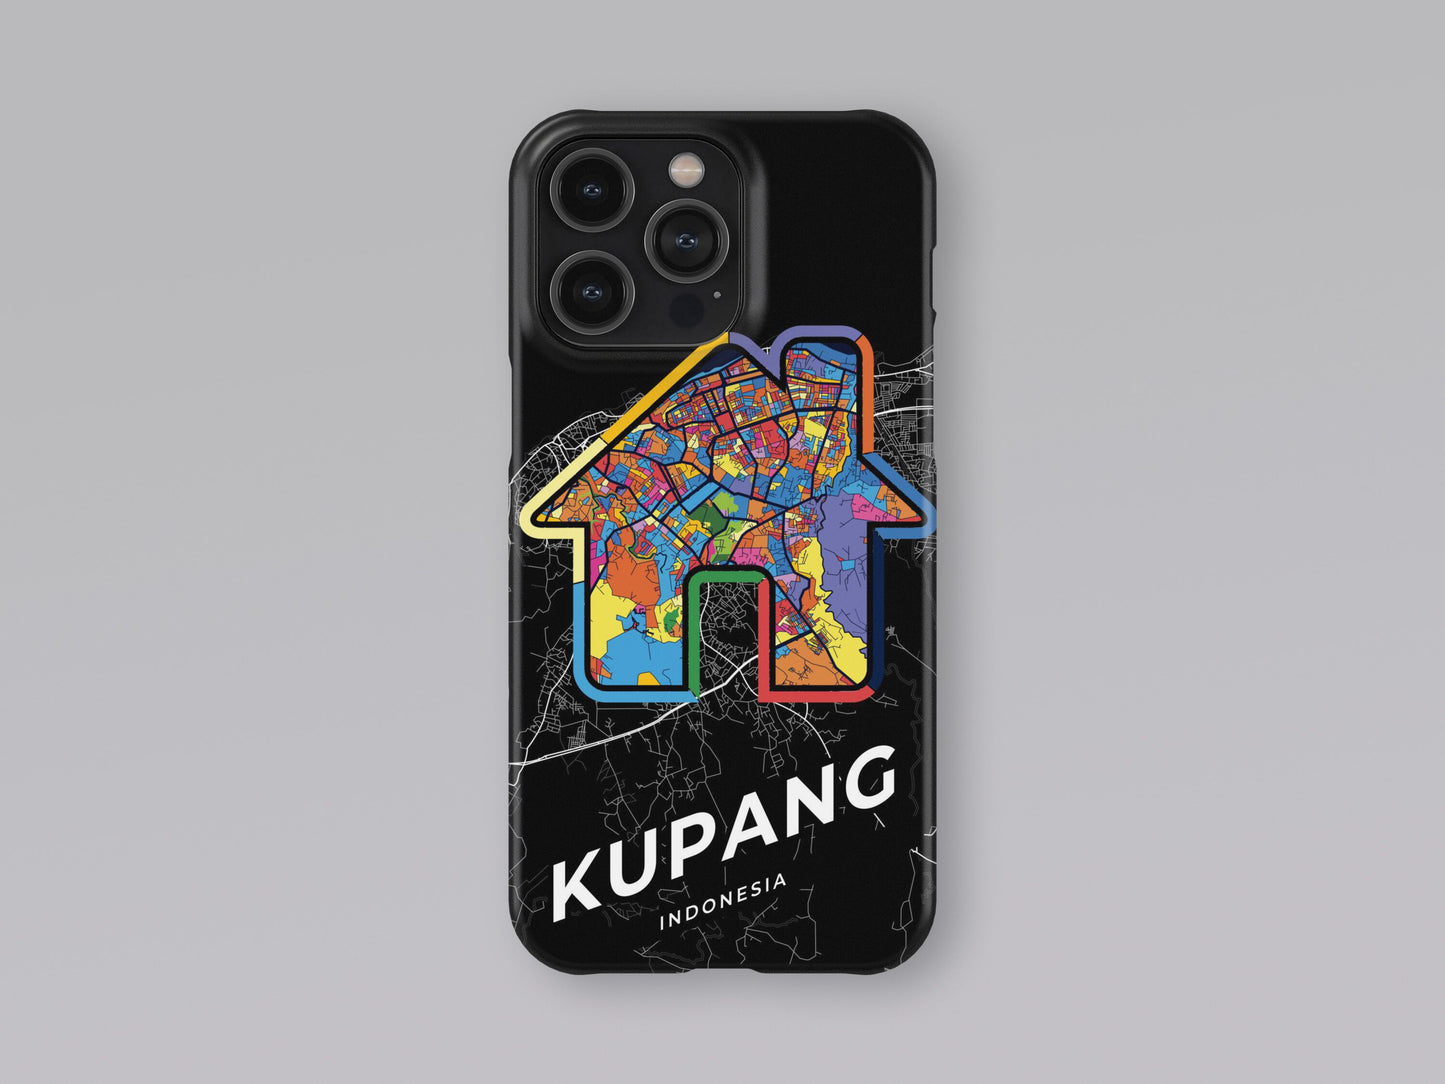 Kupang Indonesia slim phone case with colorful icon. Birthday, wedding or housewarming gift. Couple match cases. 3